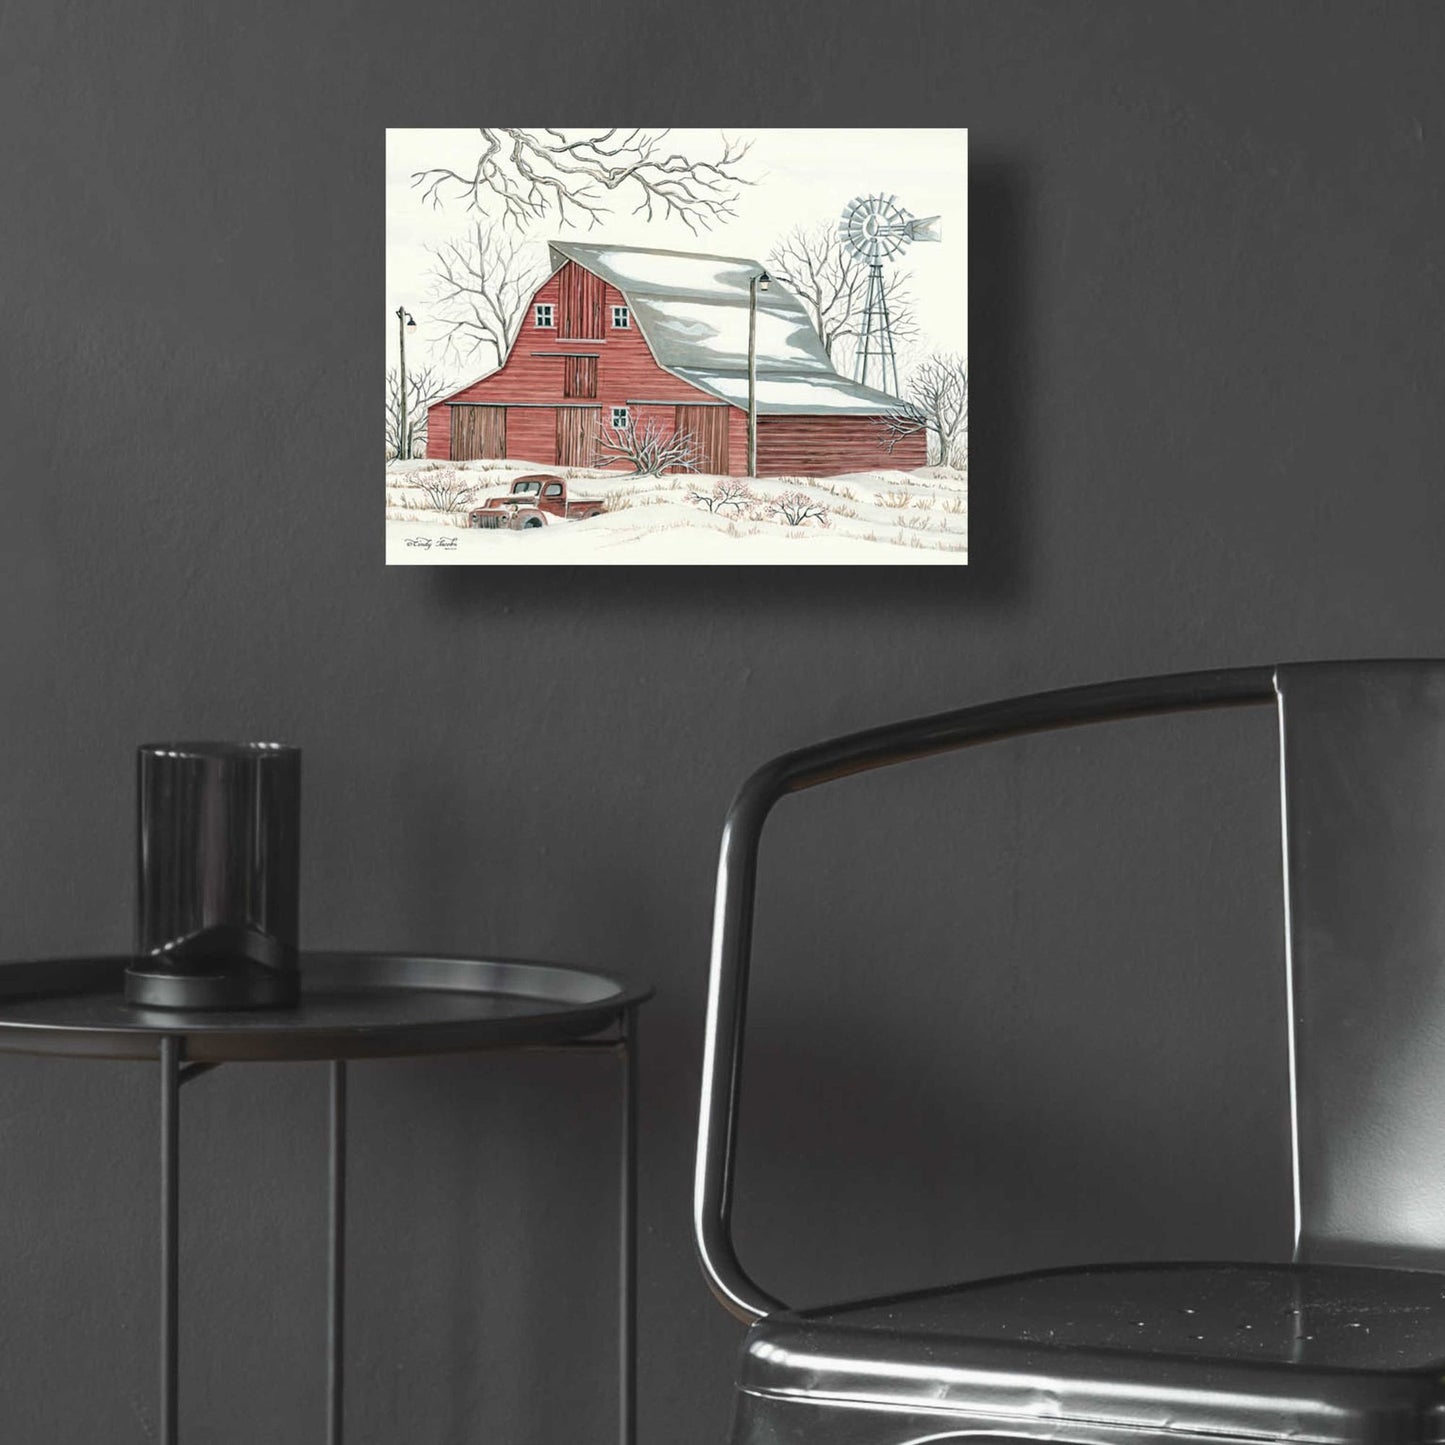 Epic Art 'Winter Barn with Pickup Truck' by Cindy Jacobs, Acrylic Glass Wall Art,16x12